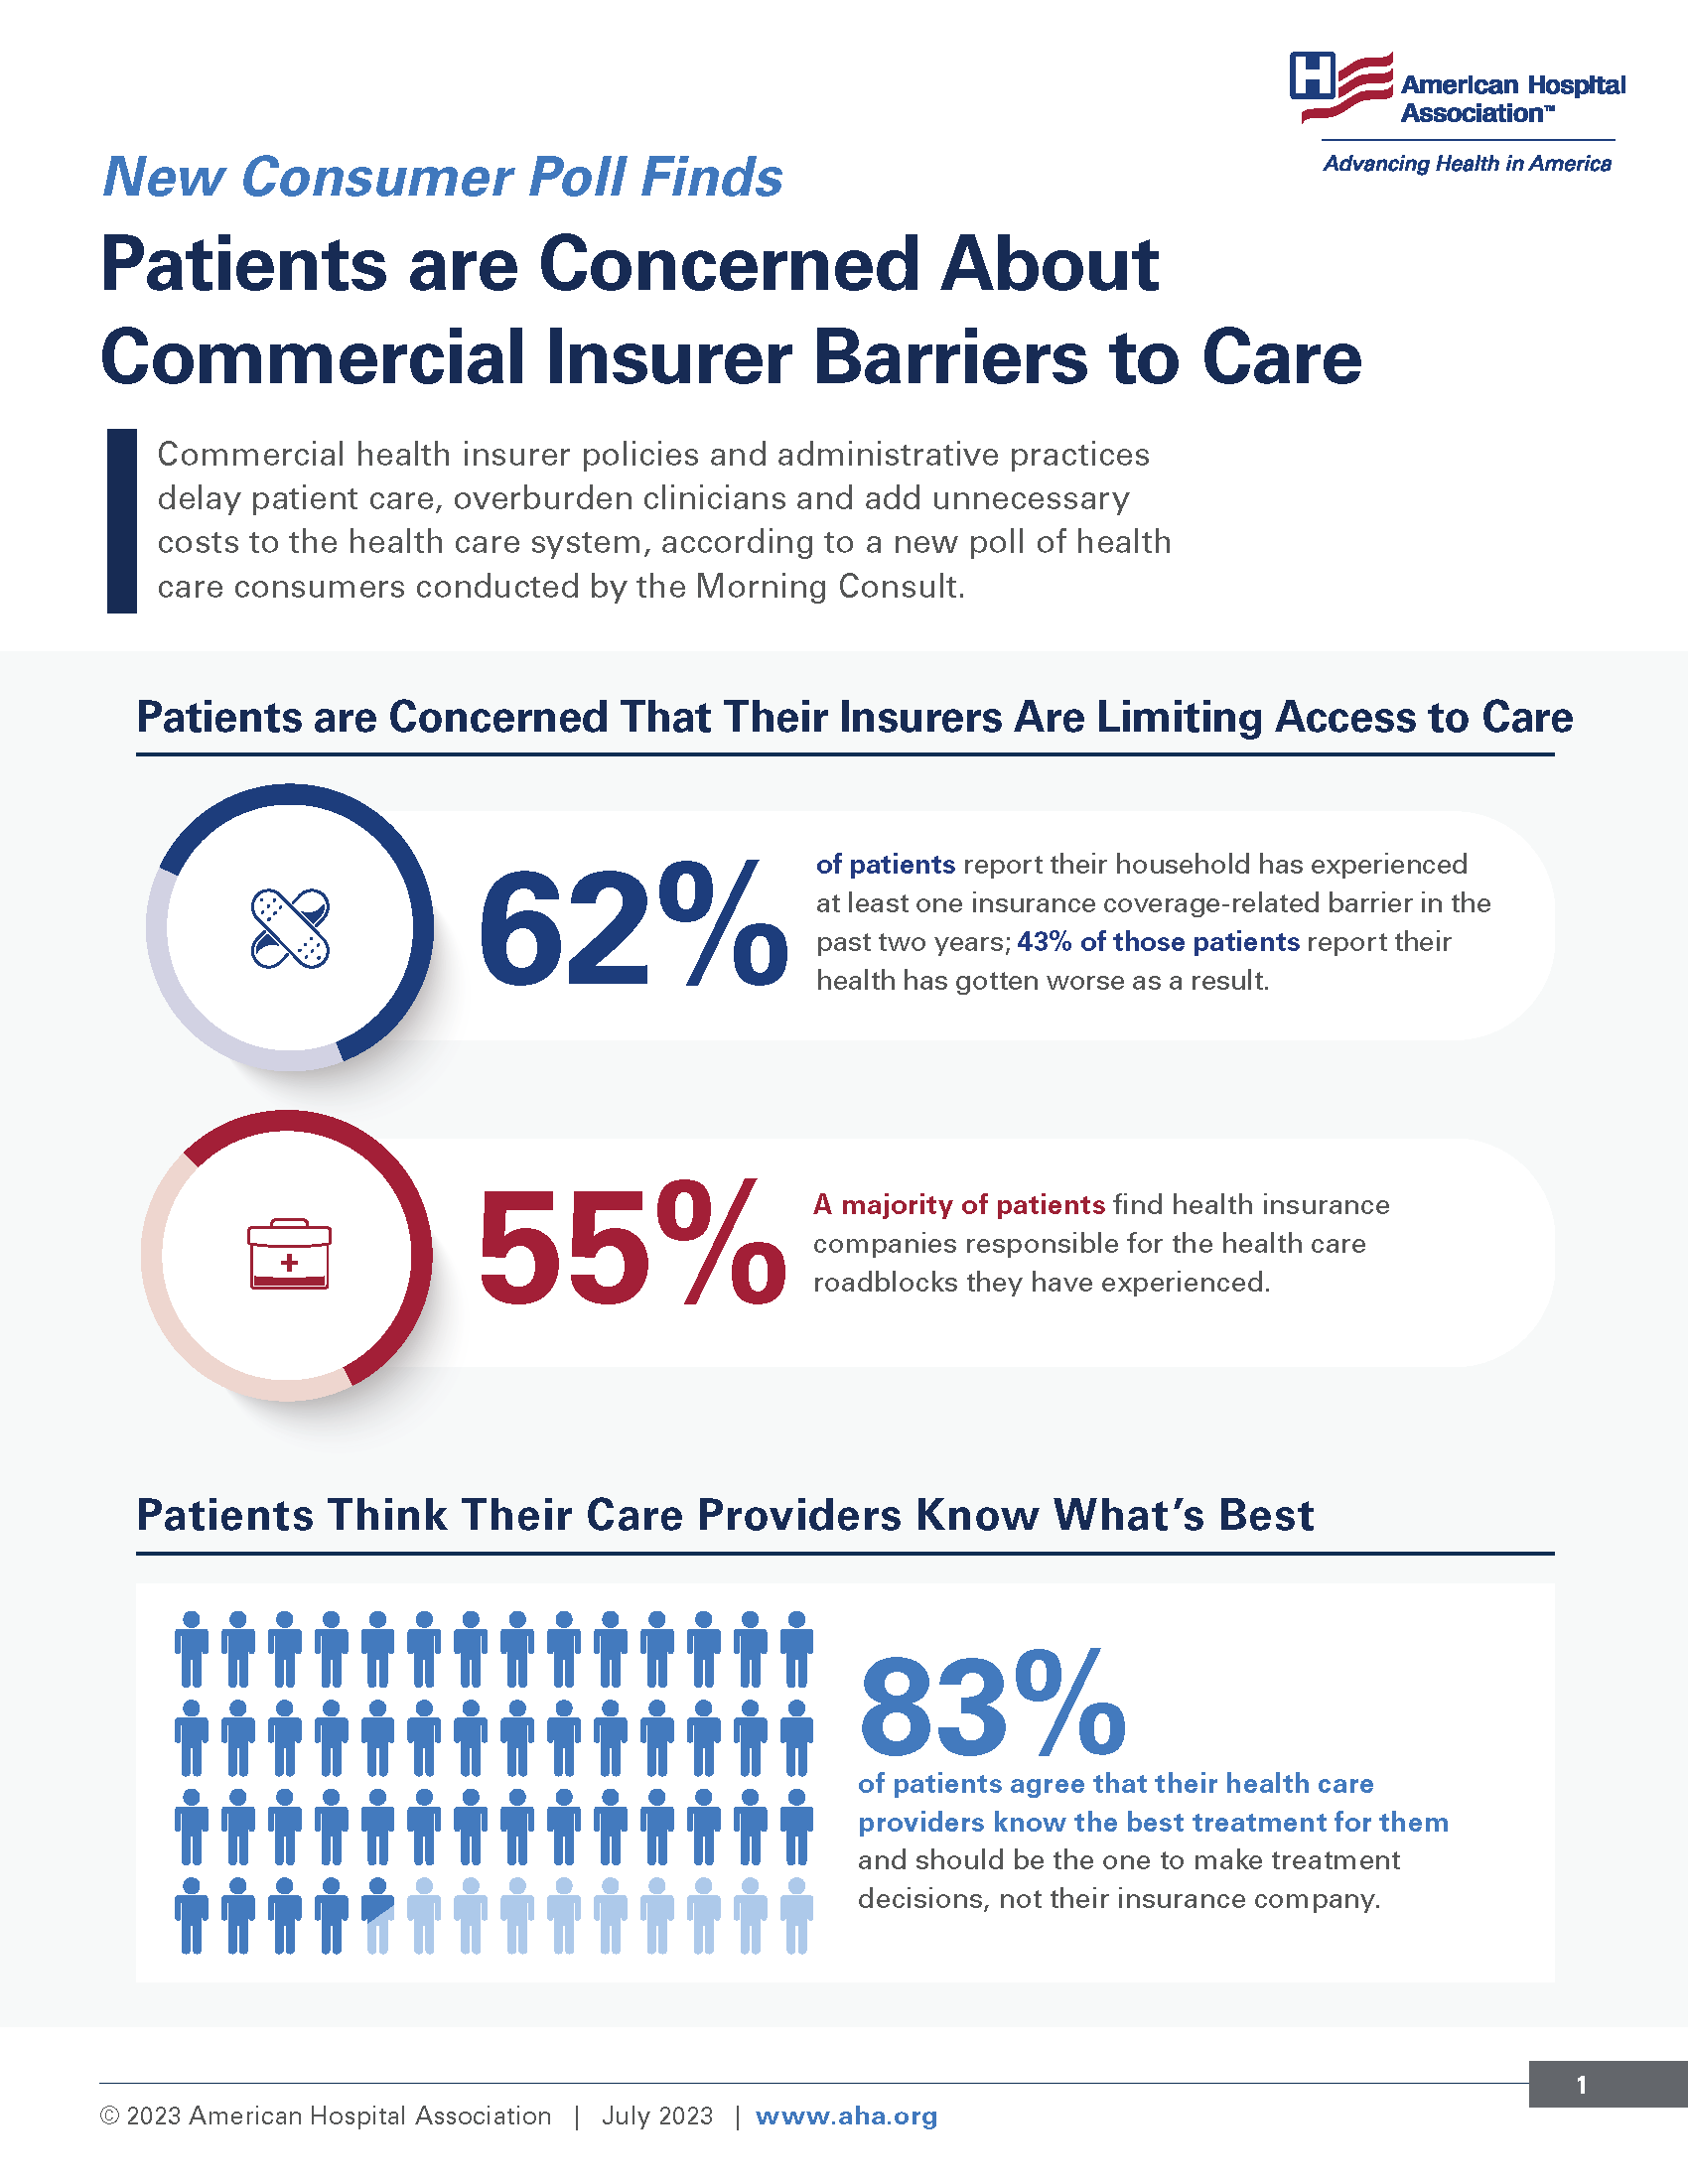 Commercial health insurer policies and administrative practices delay patient care, overburden clinicians and add unnecessary costs to the health care system, according to a new poll of health care consumers conducted by the Morning Consult. Patients Are Concerned That Their Insurers Are Limiting Access to Care. 62% of patients report their household has experienced at least one insurance coverage-related barrier in the past two years; 43% of those patients report their health has gotten worse as a result. 55%: A majority of patients find health insurance companies responsible for health care roadblocks they have experienced. Patients Think Their Care Providers Know What's Best. 83% of patients agree that their health care providers know the best treatment for them and should be the one to make treatment decisions, not their insurance company.